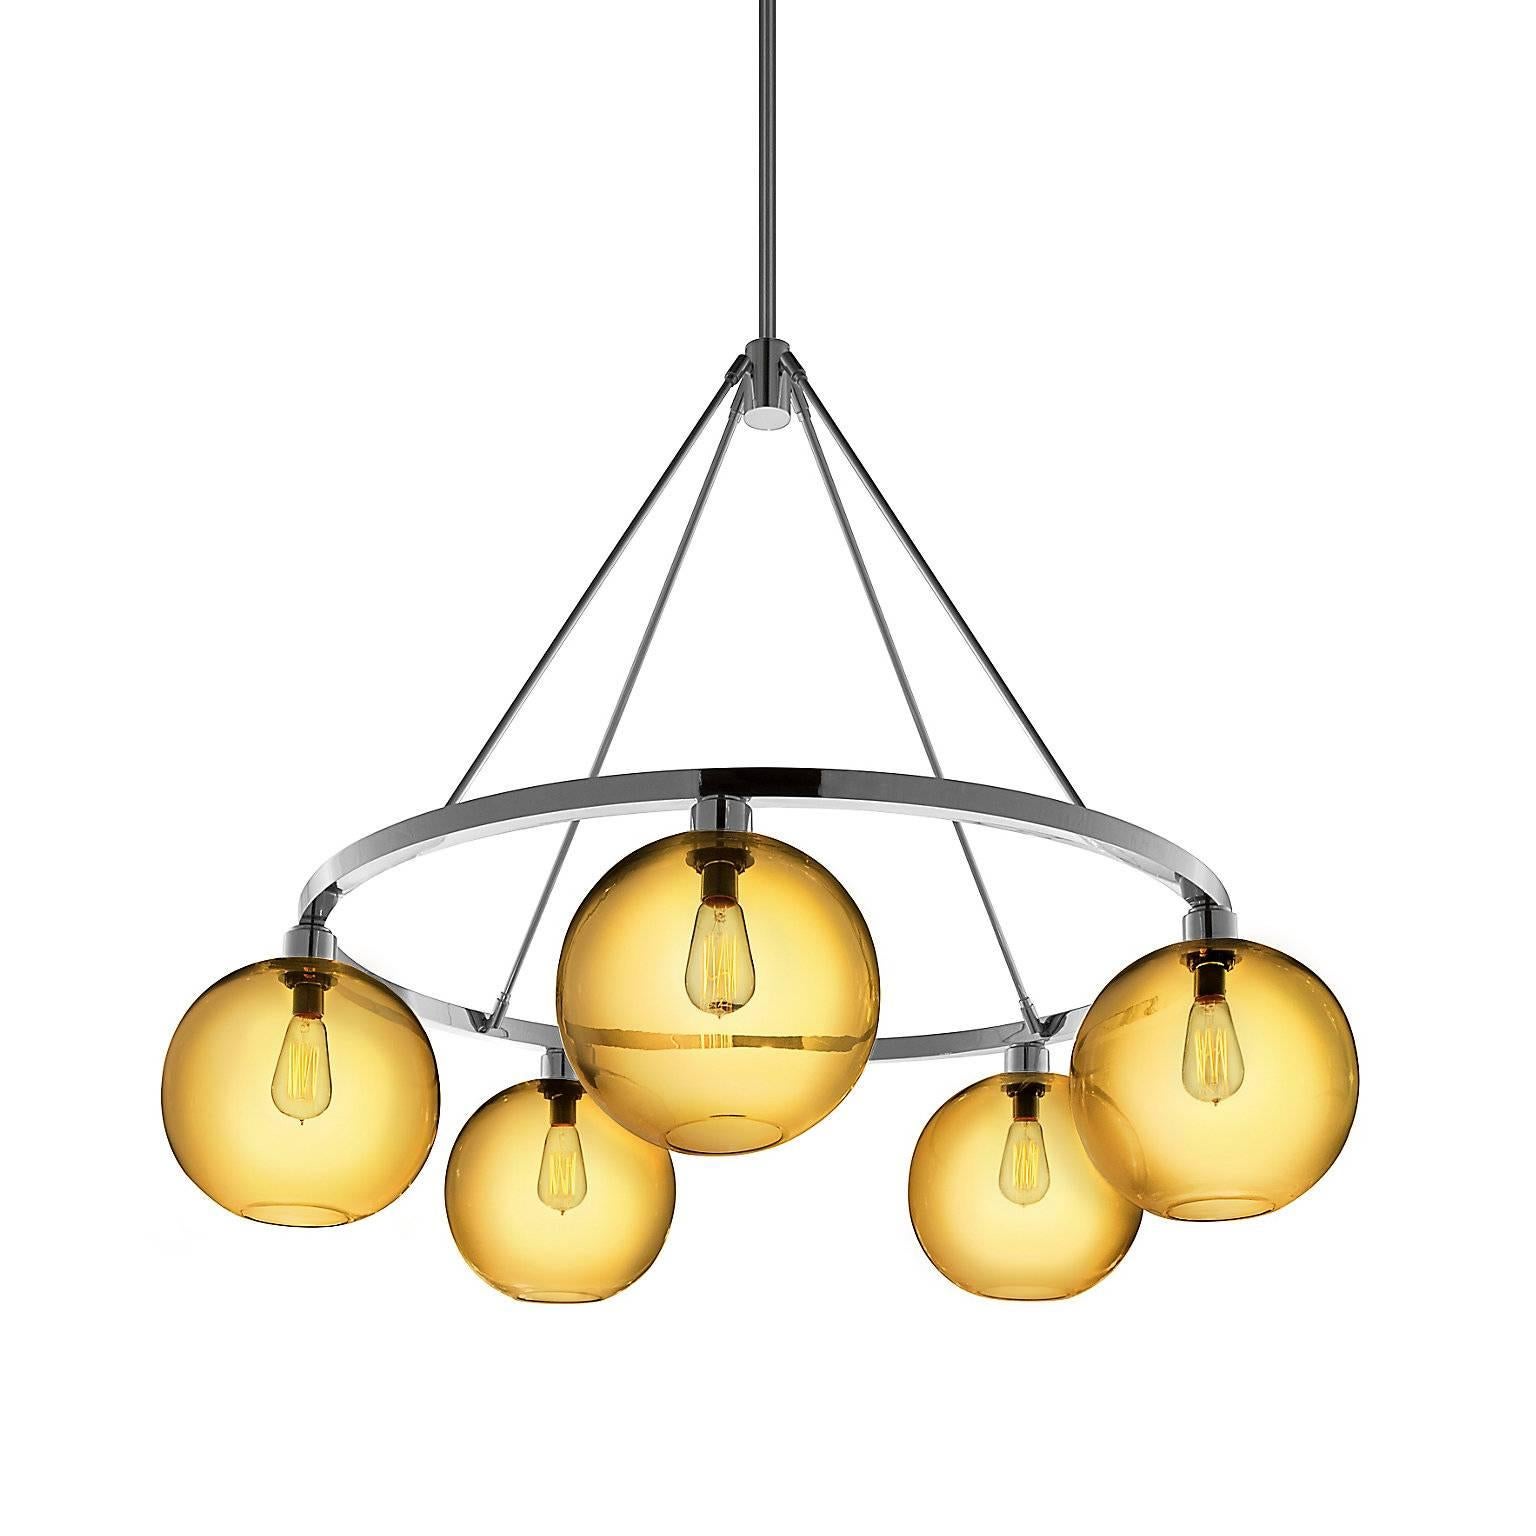 Solitaire Amber Handblown Modern Glass Polished Nickel Chandelier Light For Sale